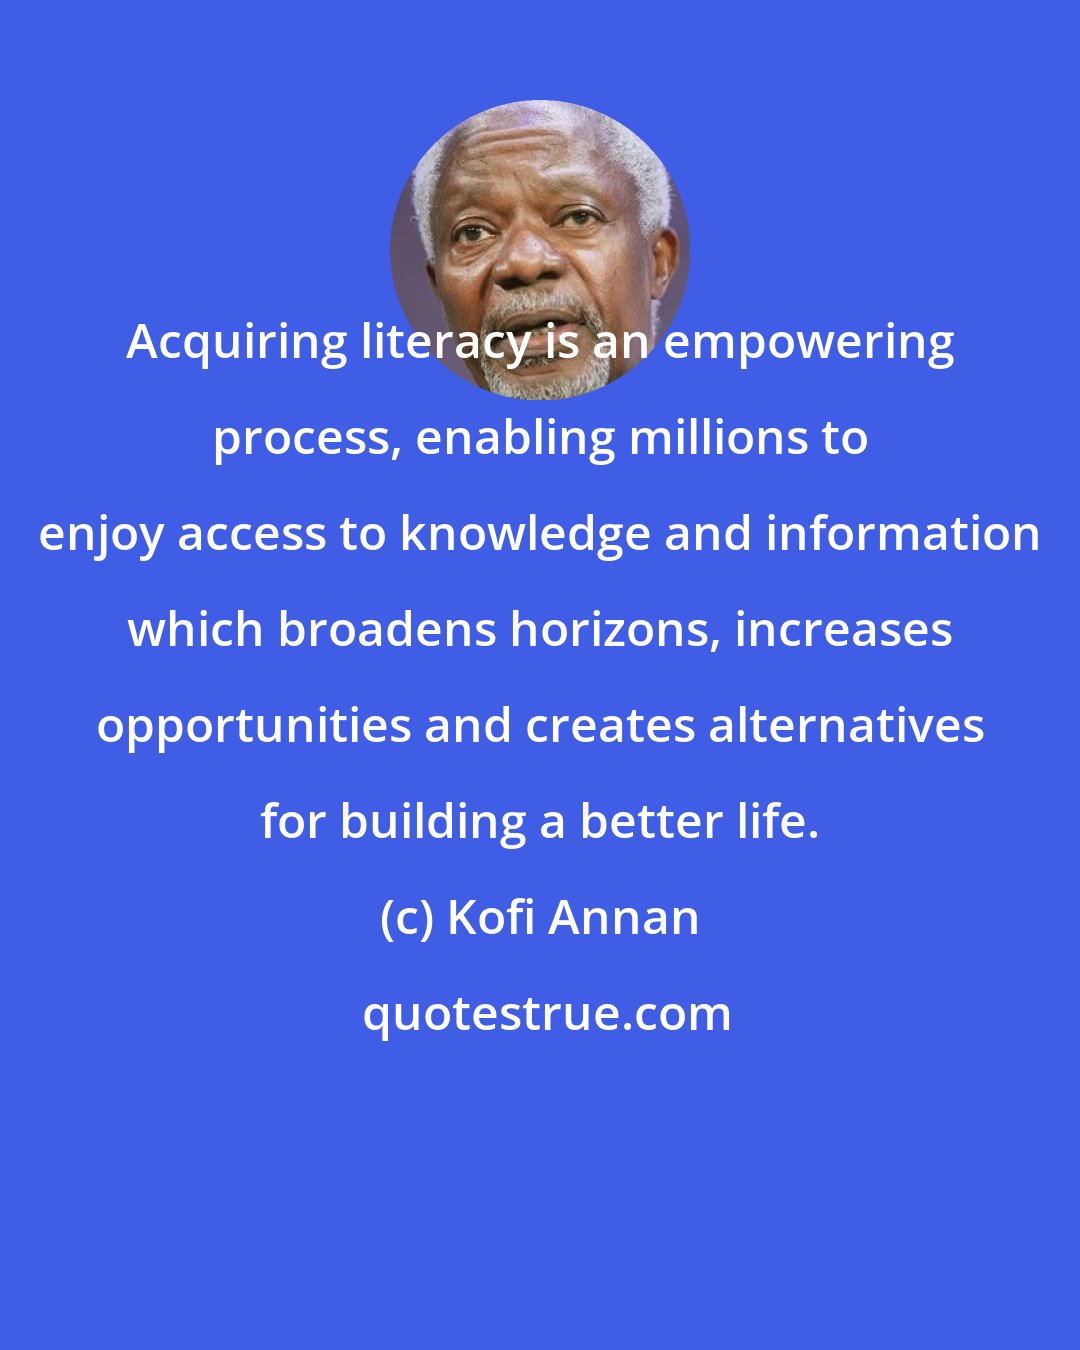 Kofi Annan: Acquiring literacy is an empowering process, enabling millions to enjoy access to knowledge and information which broadens horizons, increases opportunities and creates alternatives for building a better life.